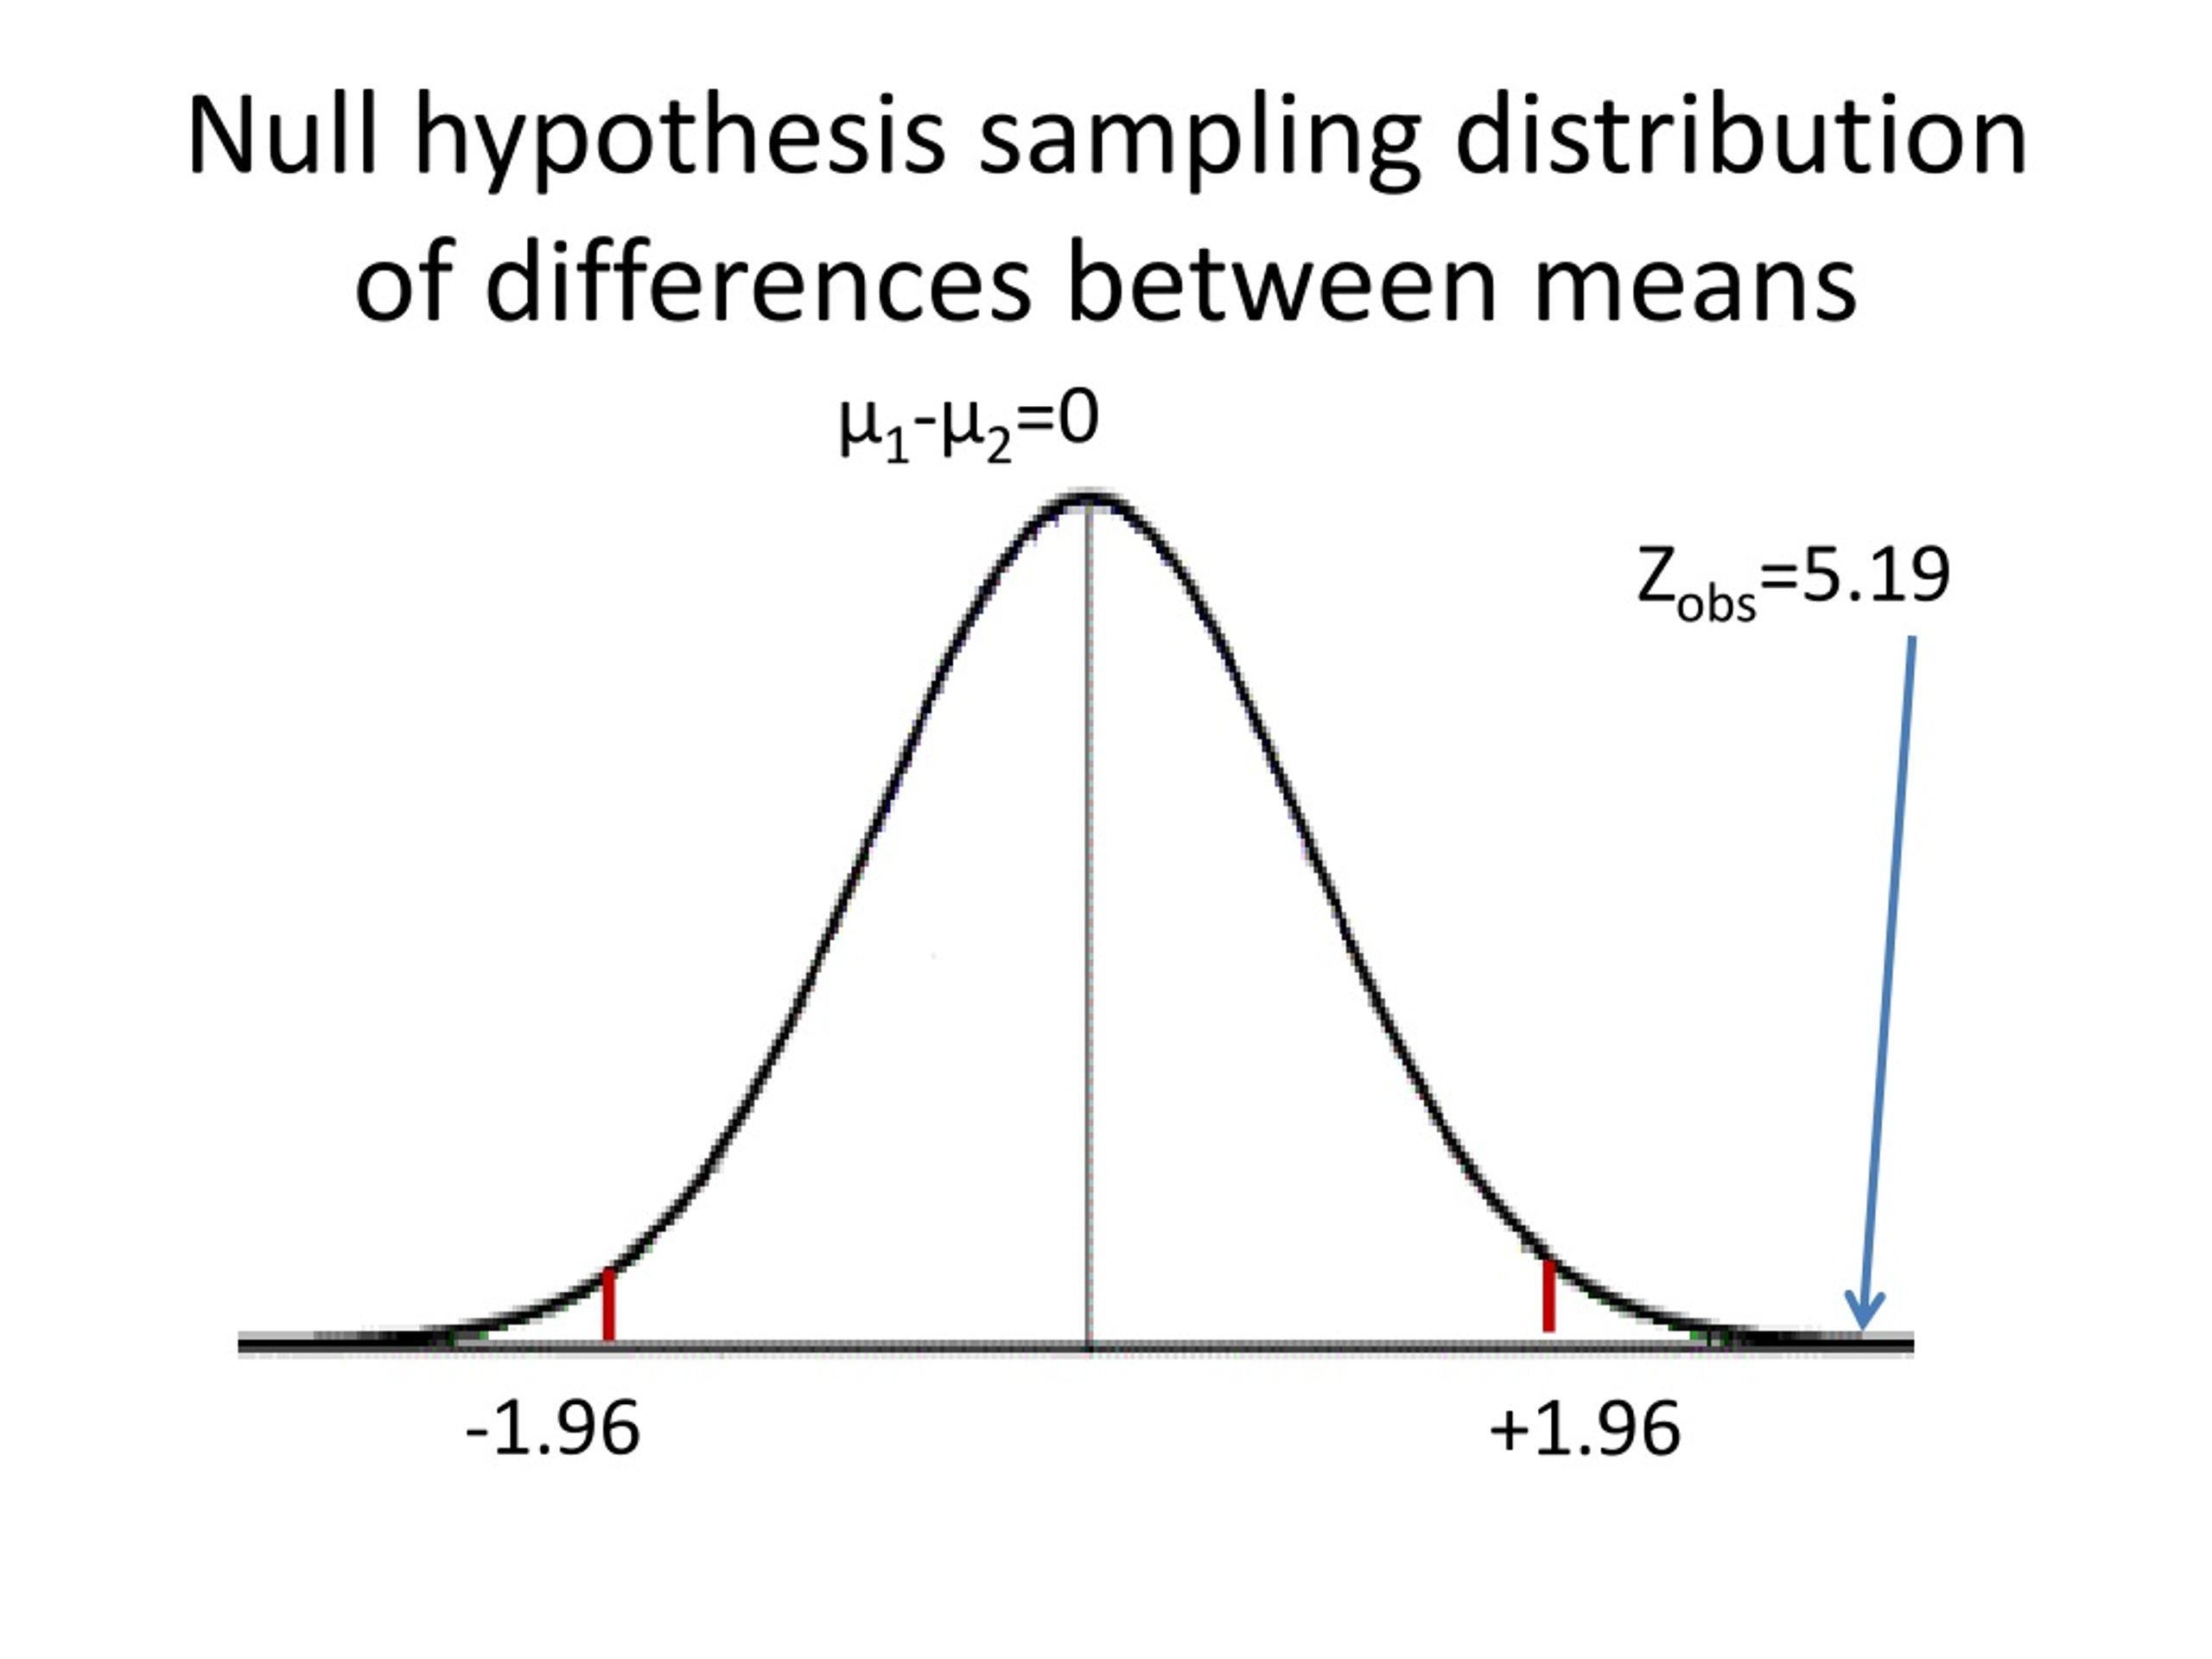 null hypothesis 1.96